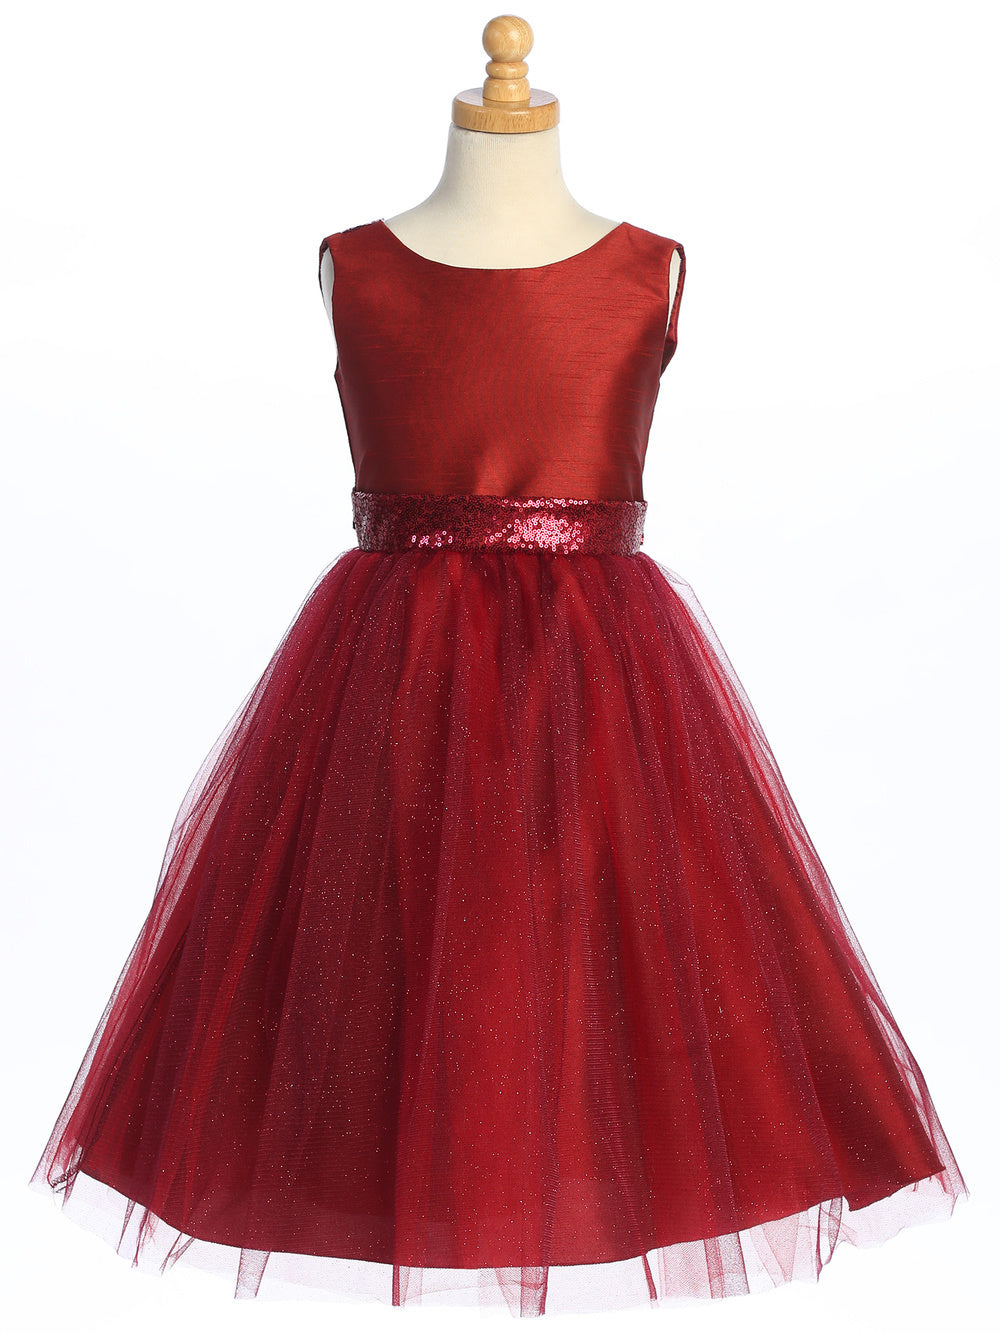 Burgundy shantung dress with sparkle tulle and sequins, a flower girl's dream.